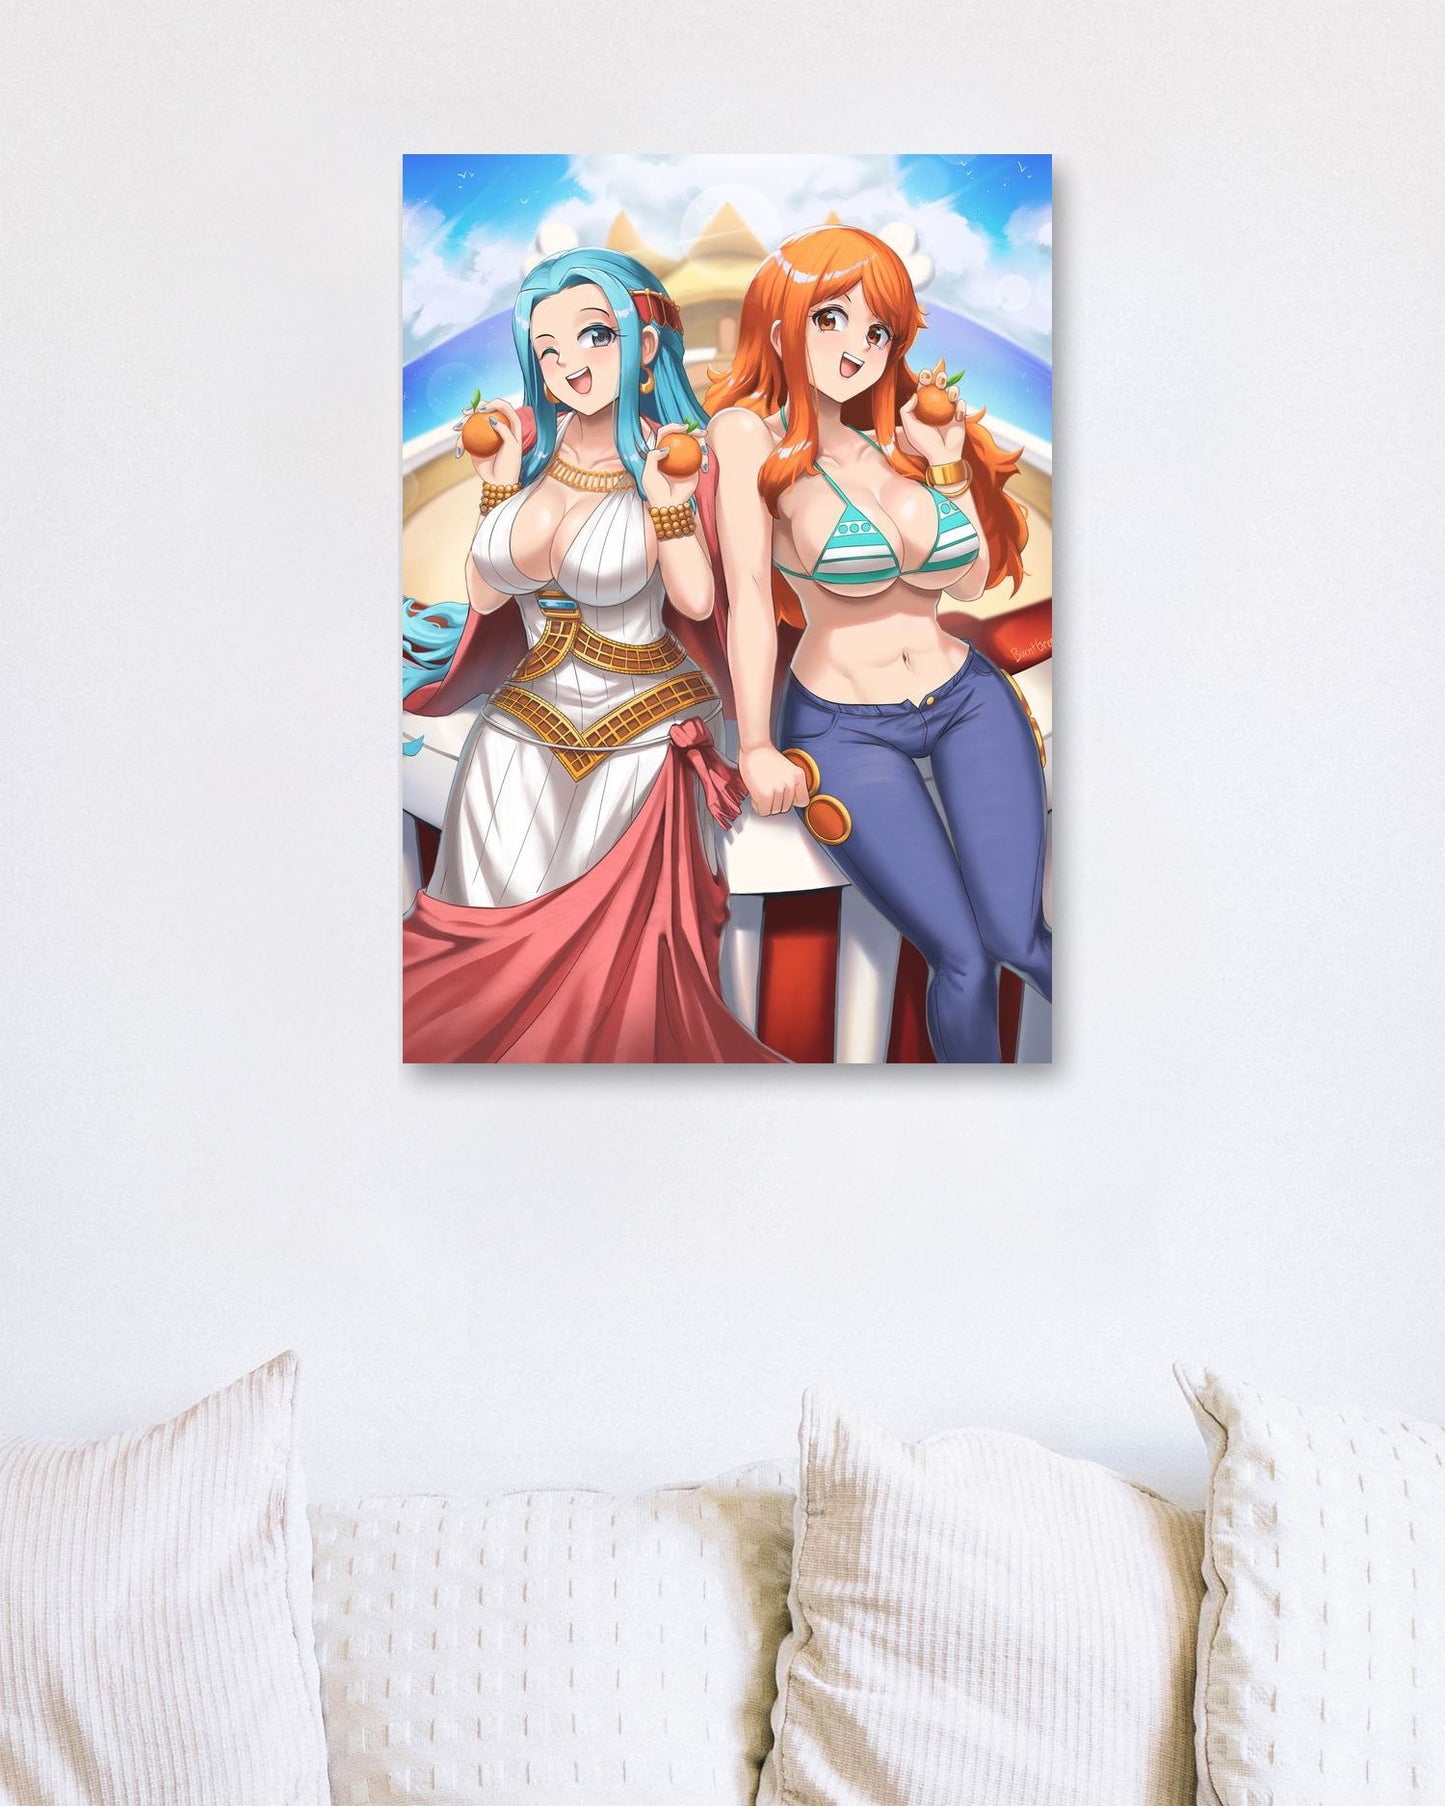 One piece 18 - @UPGallery